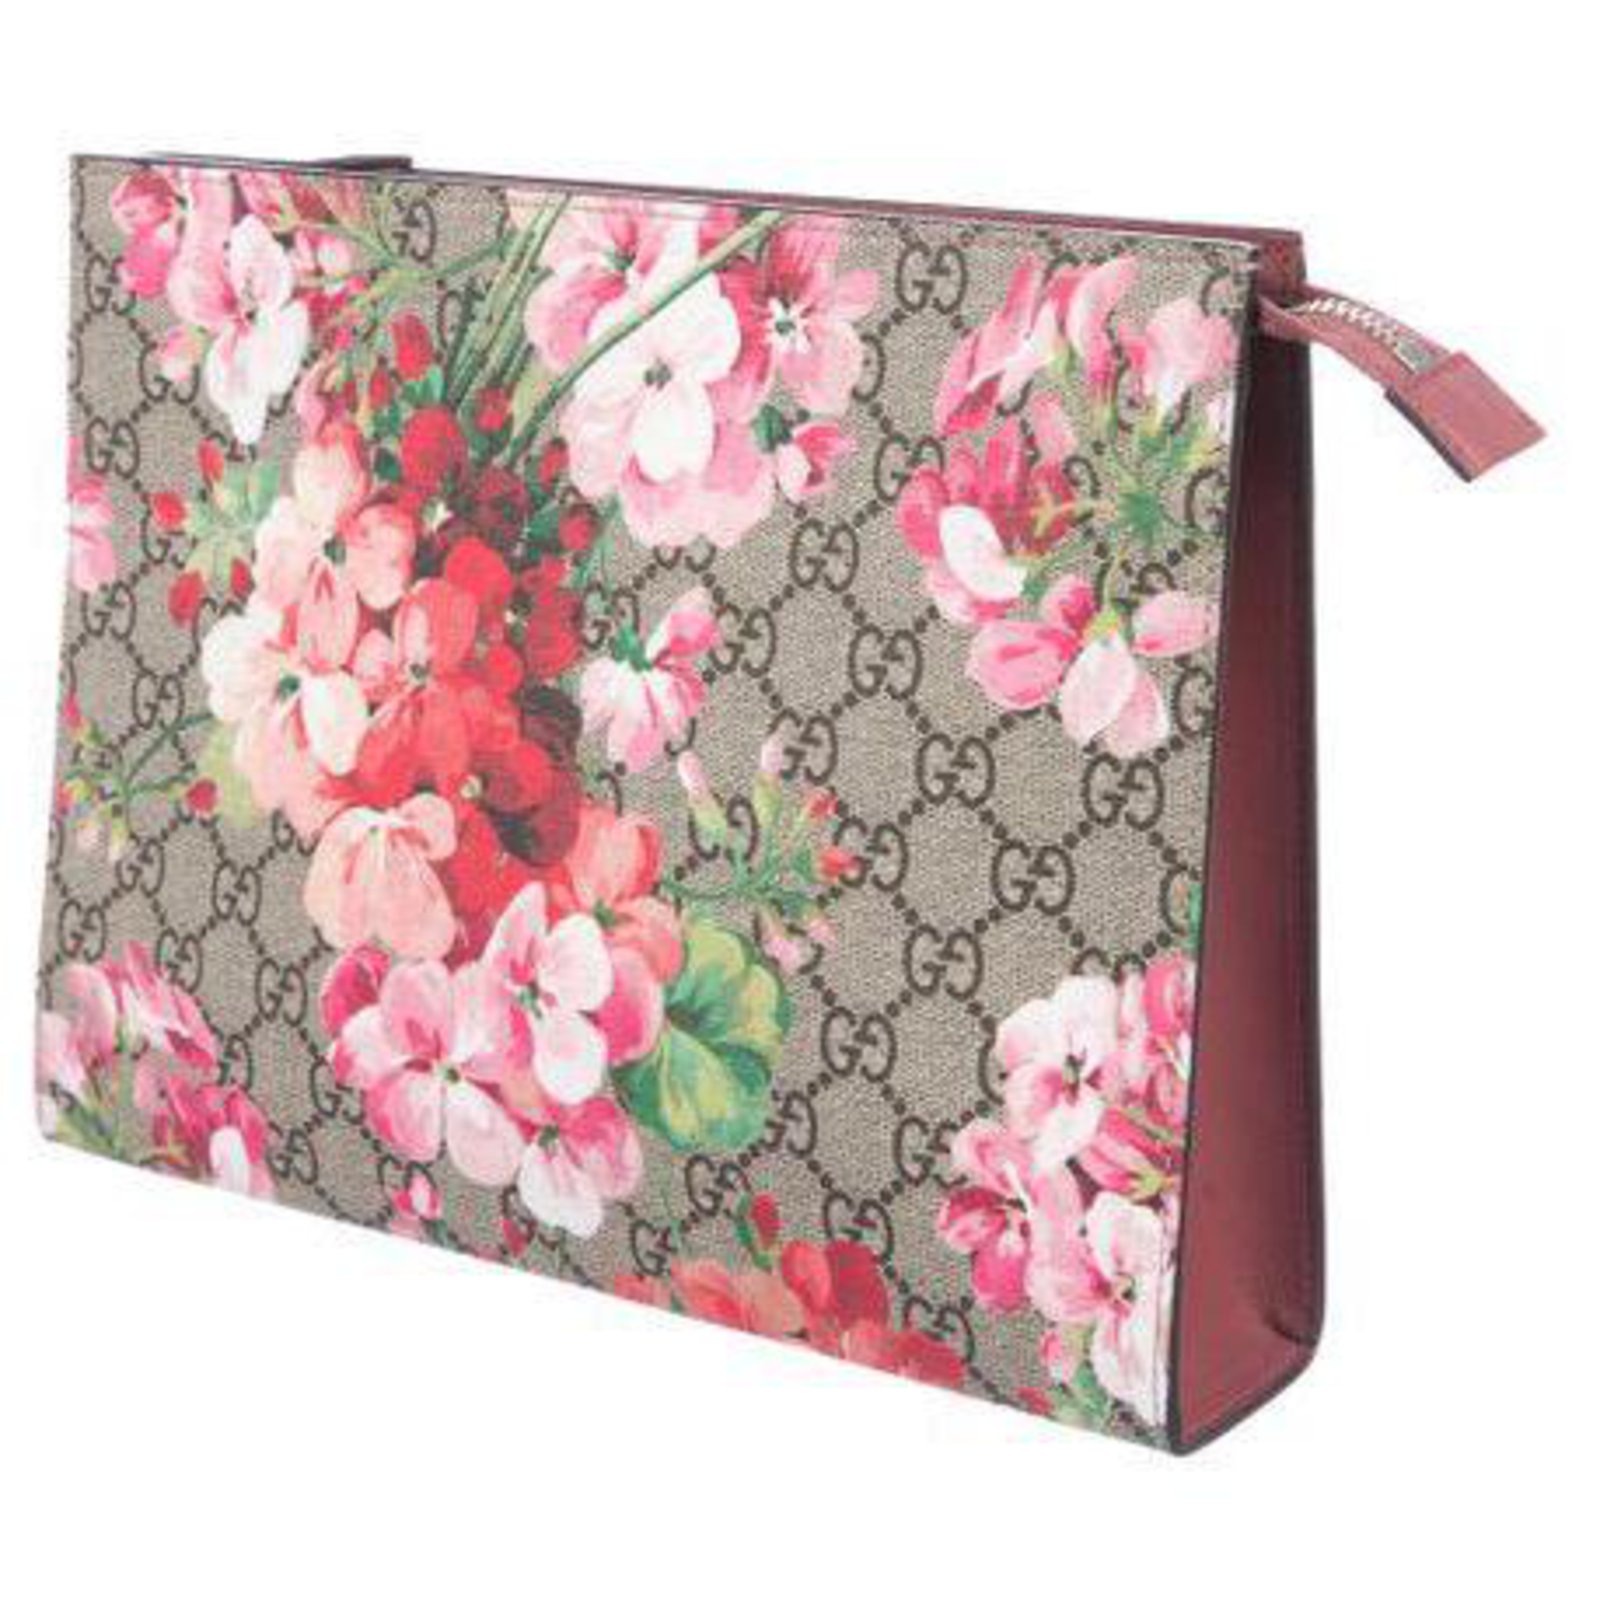 Gucci Bloom Pouch - For Sale on 1stDibs  gucci bloom clutch bag, gucci  bloom pochette, gucci floral pouch